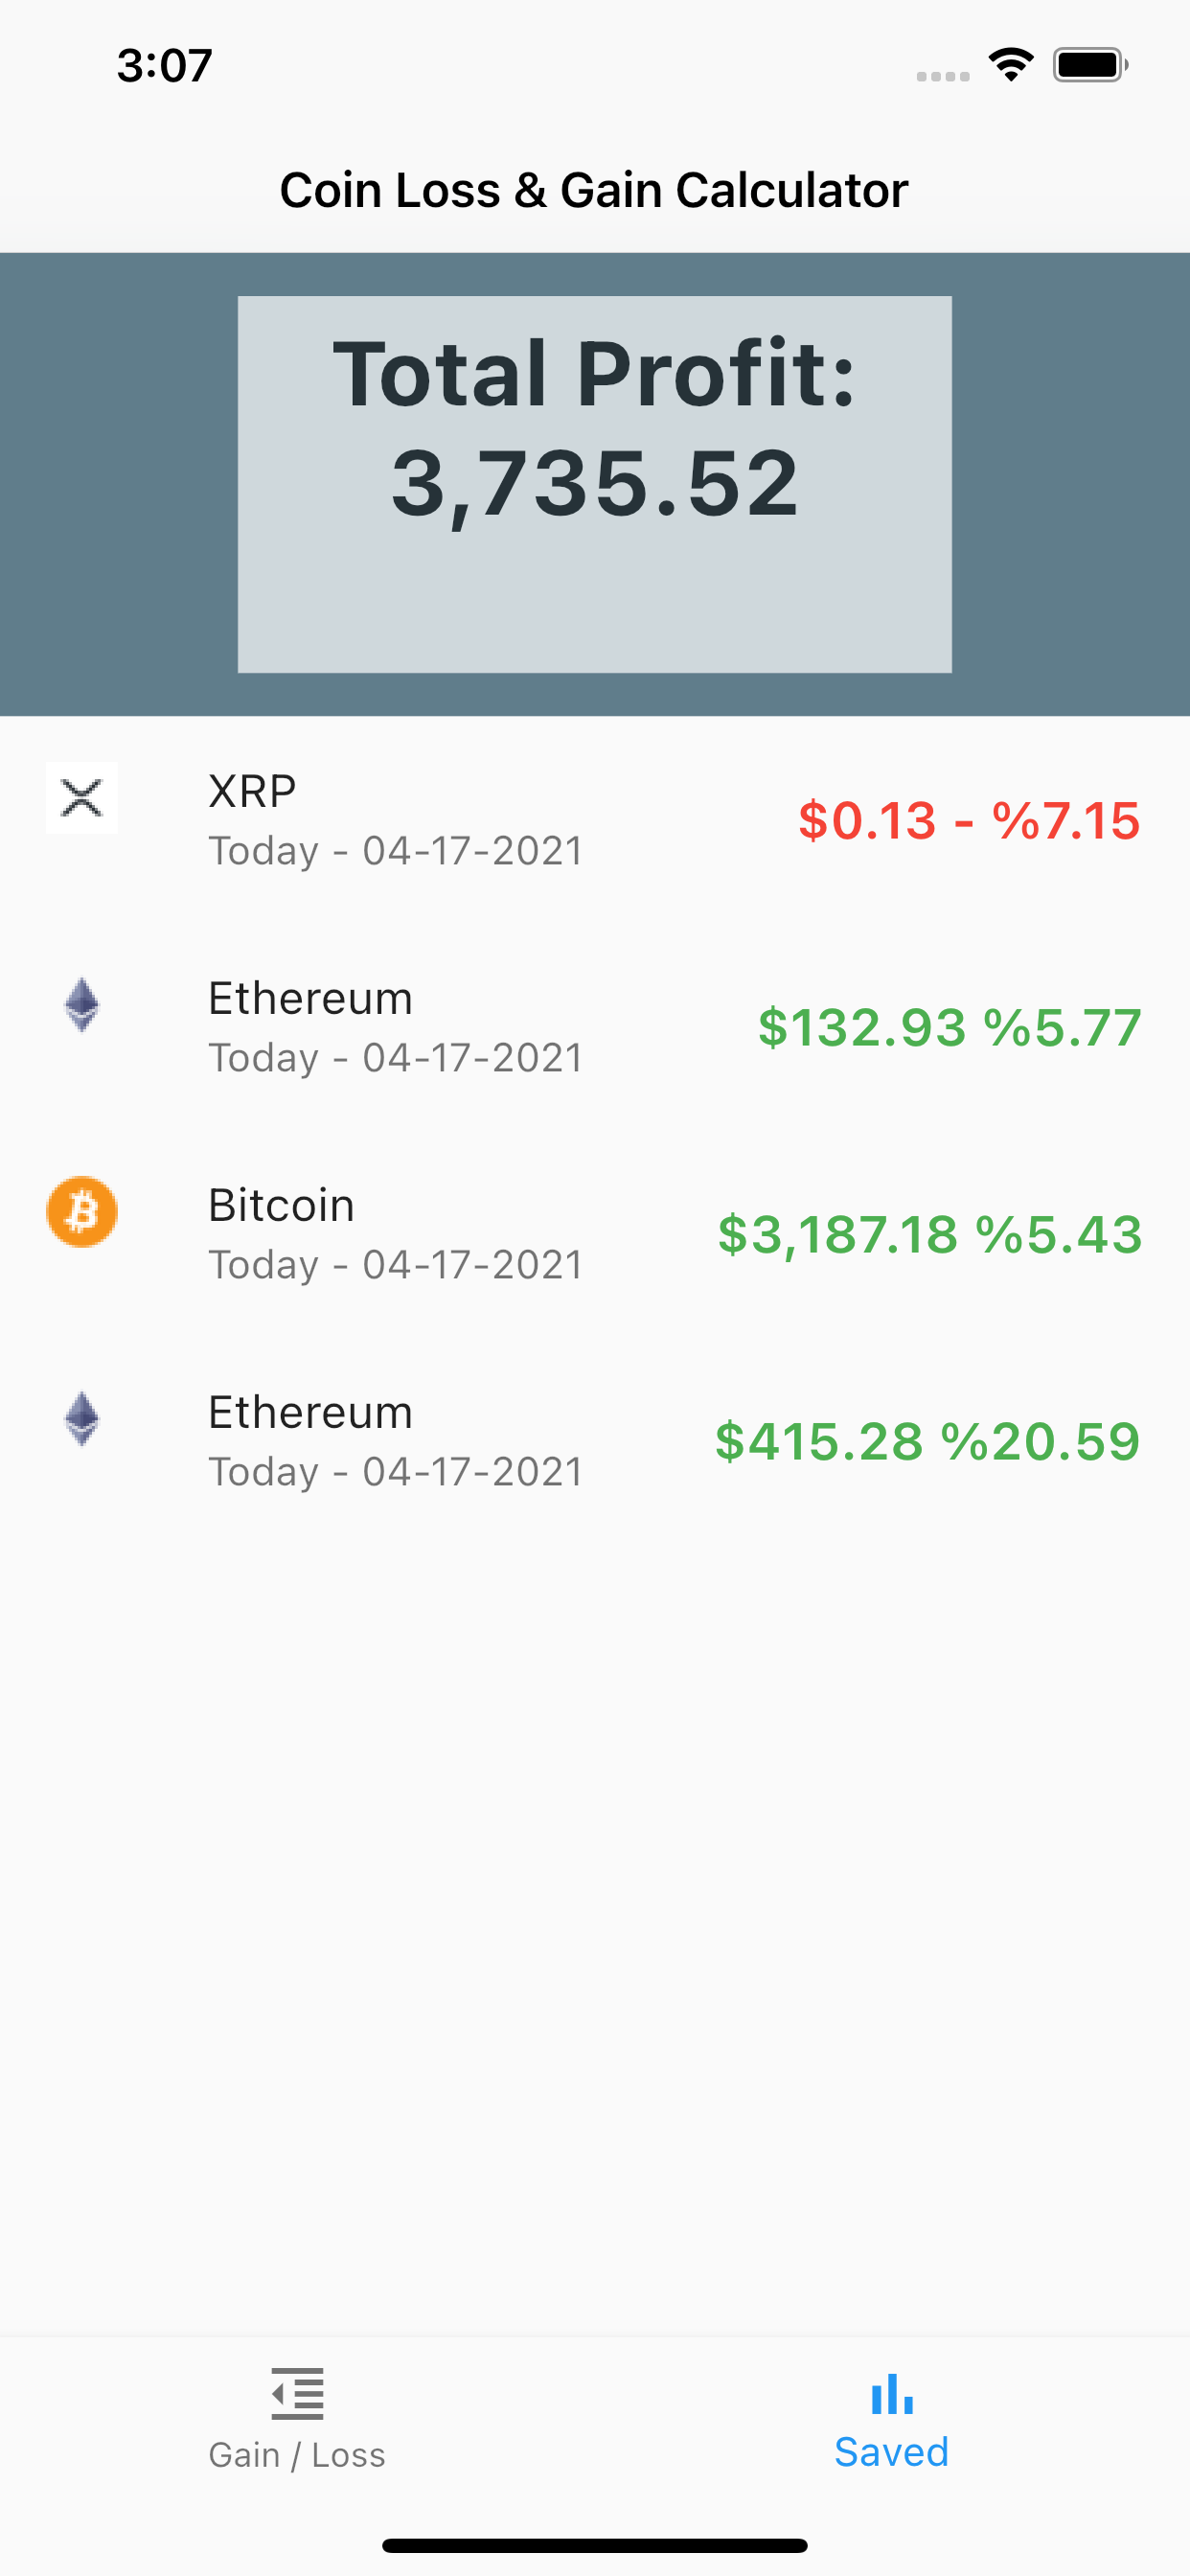 Crypto Loss Gain Calculator App build with Flutter